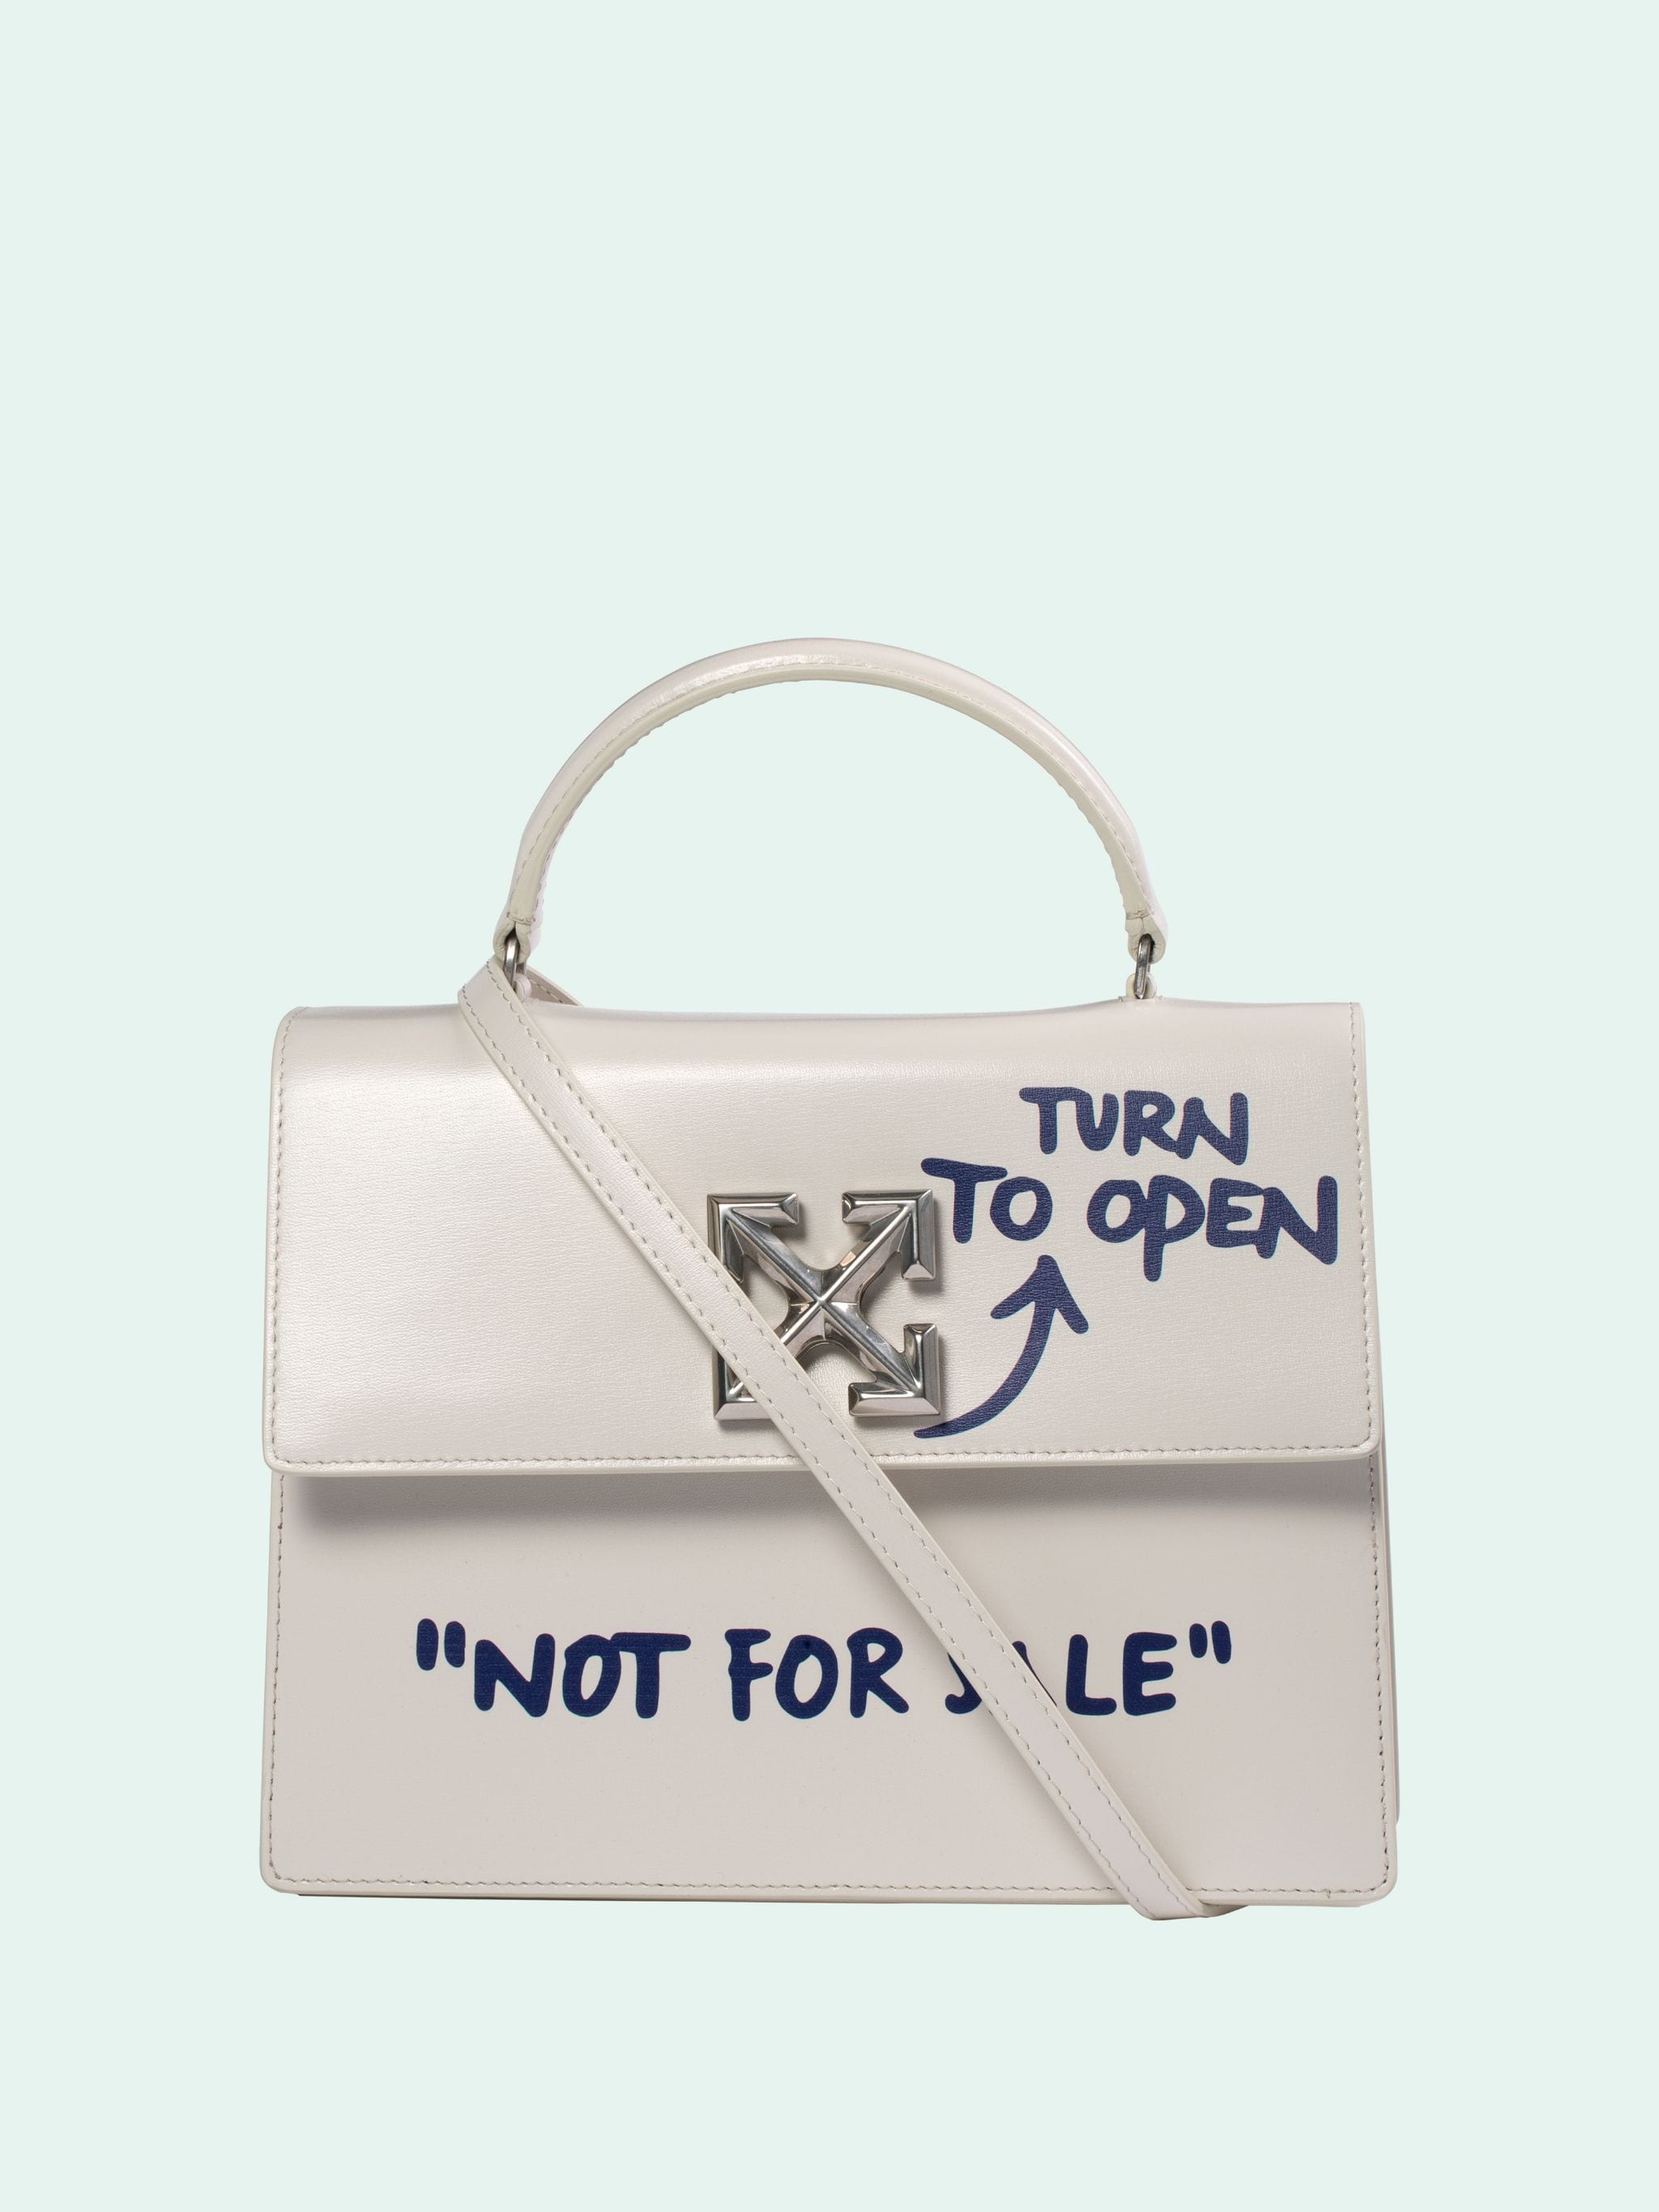 Italianist - For your wishlist: 2.8 Jitney bag in white with holes. White  top handle. Foldover flap with press-release fastening and removable  shoulder strap. #OffWhite #JItneybag #trend #handbags